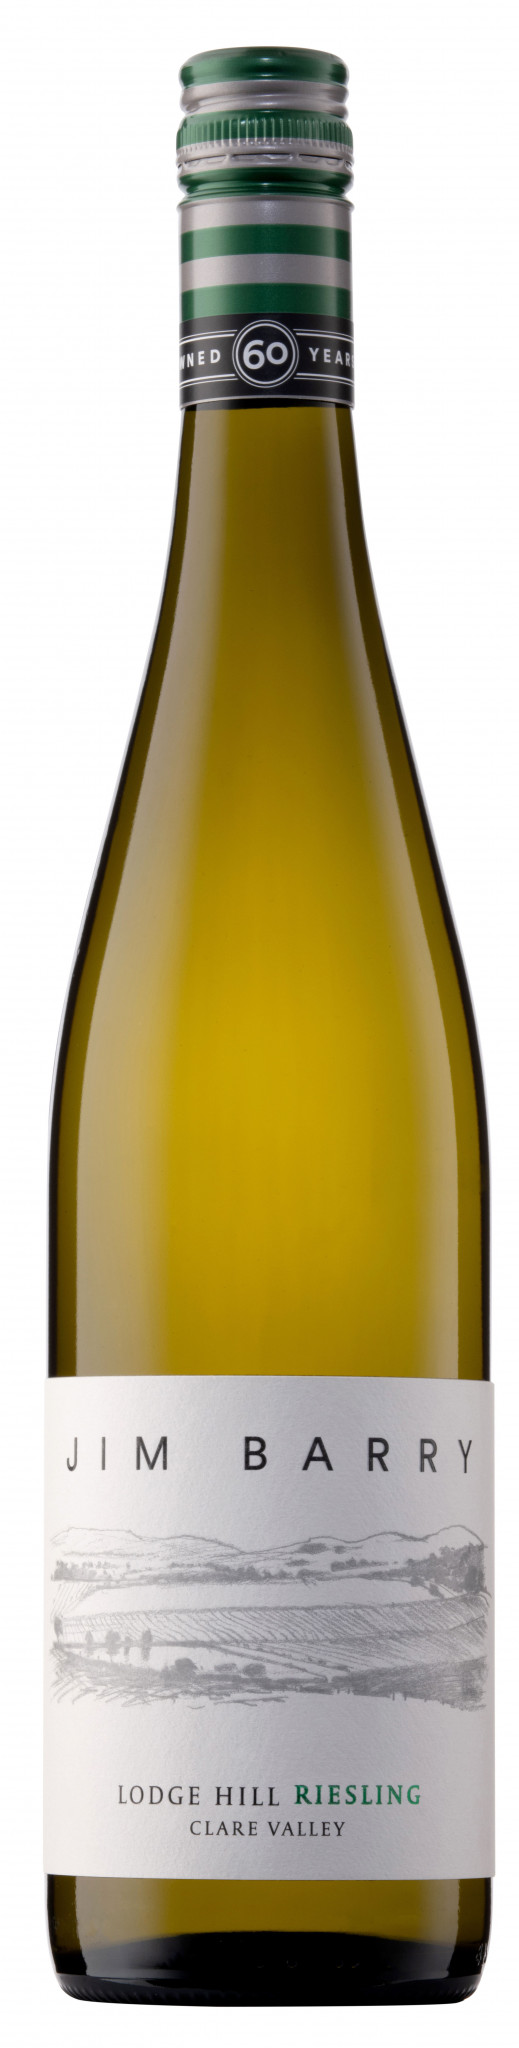 Jim Barry Lodge Hill Riesling